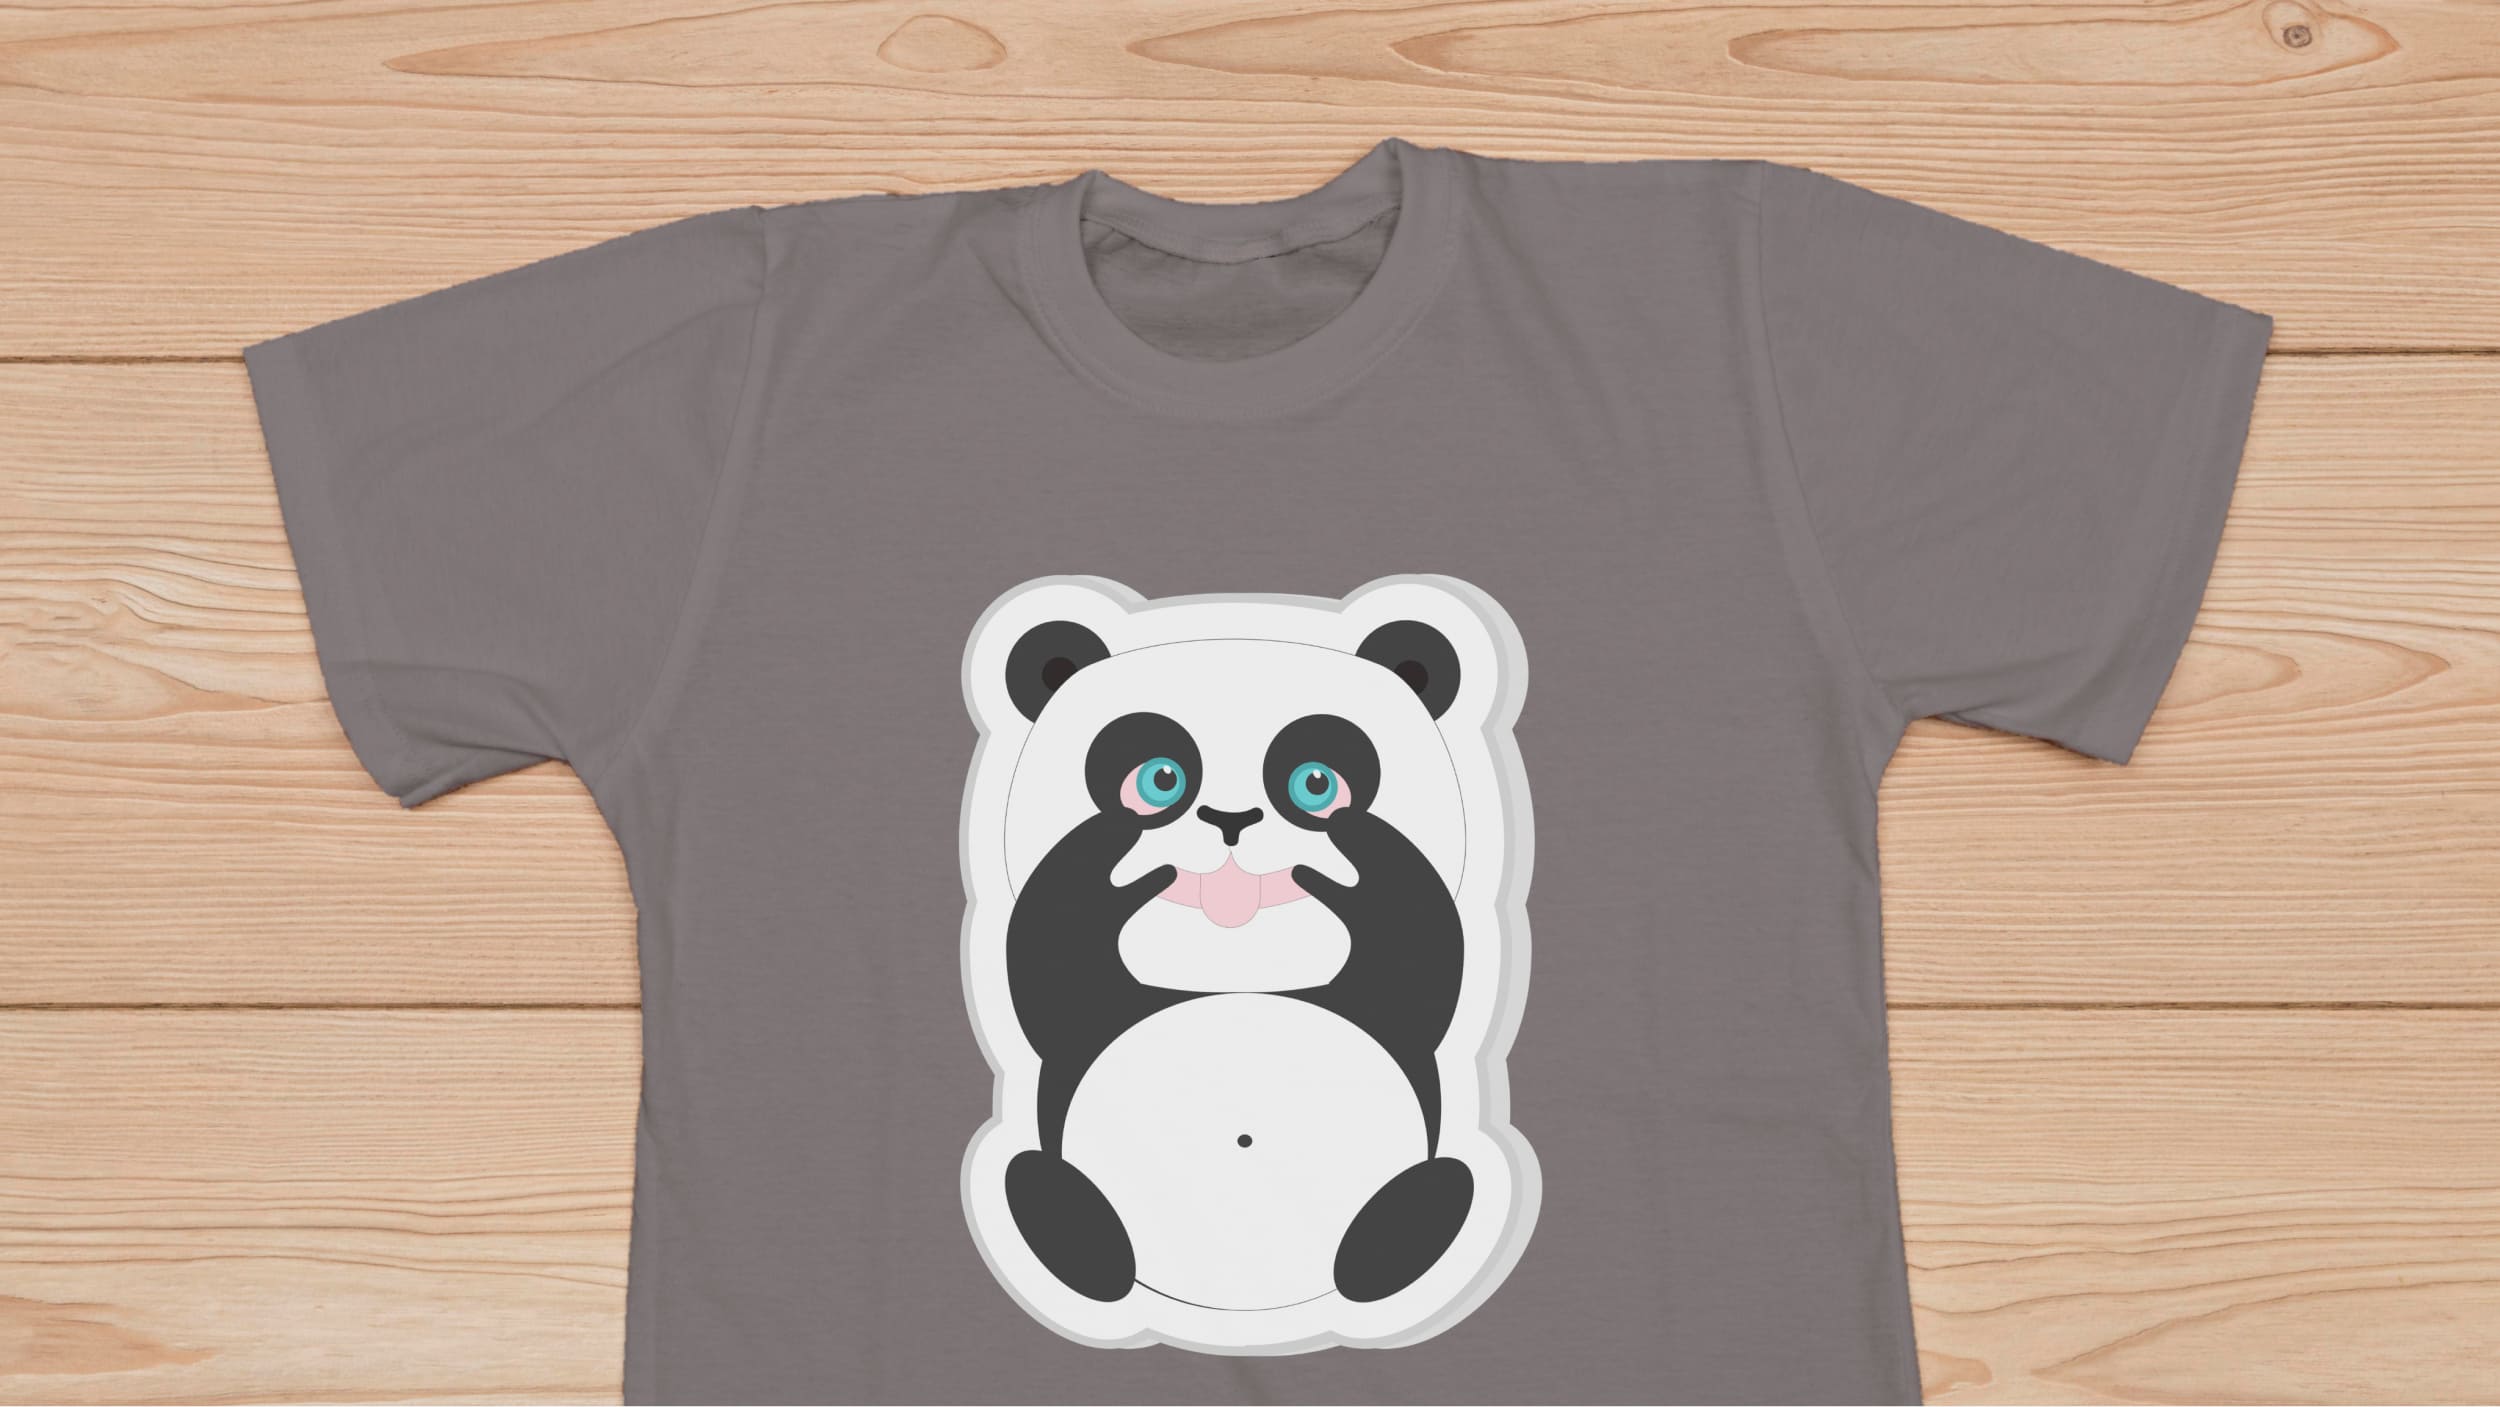 Gray t-shirt with funny panda bear on a wooden background.